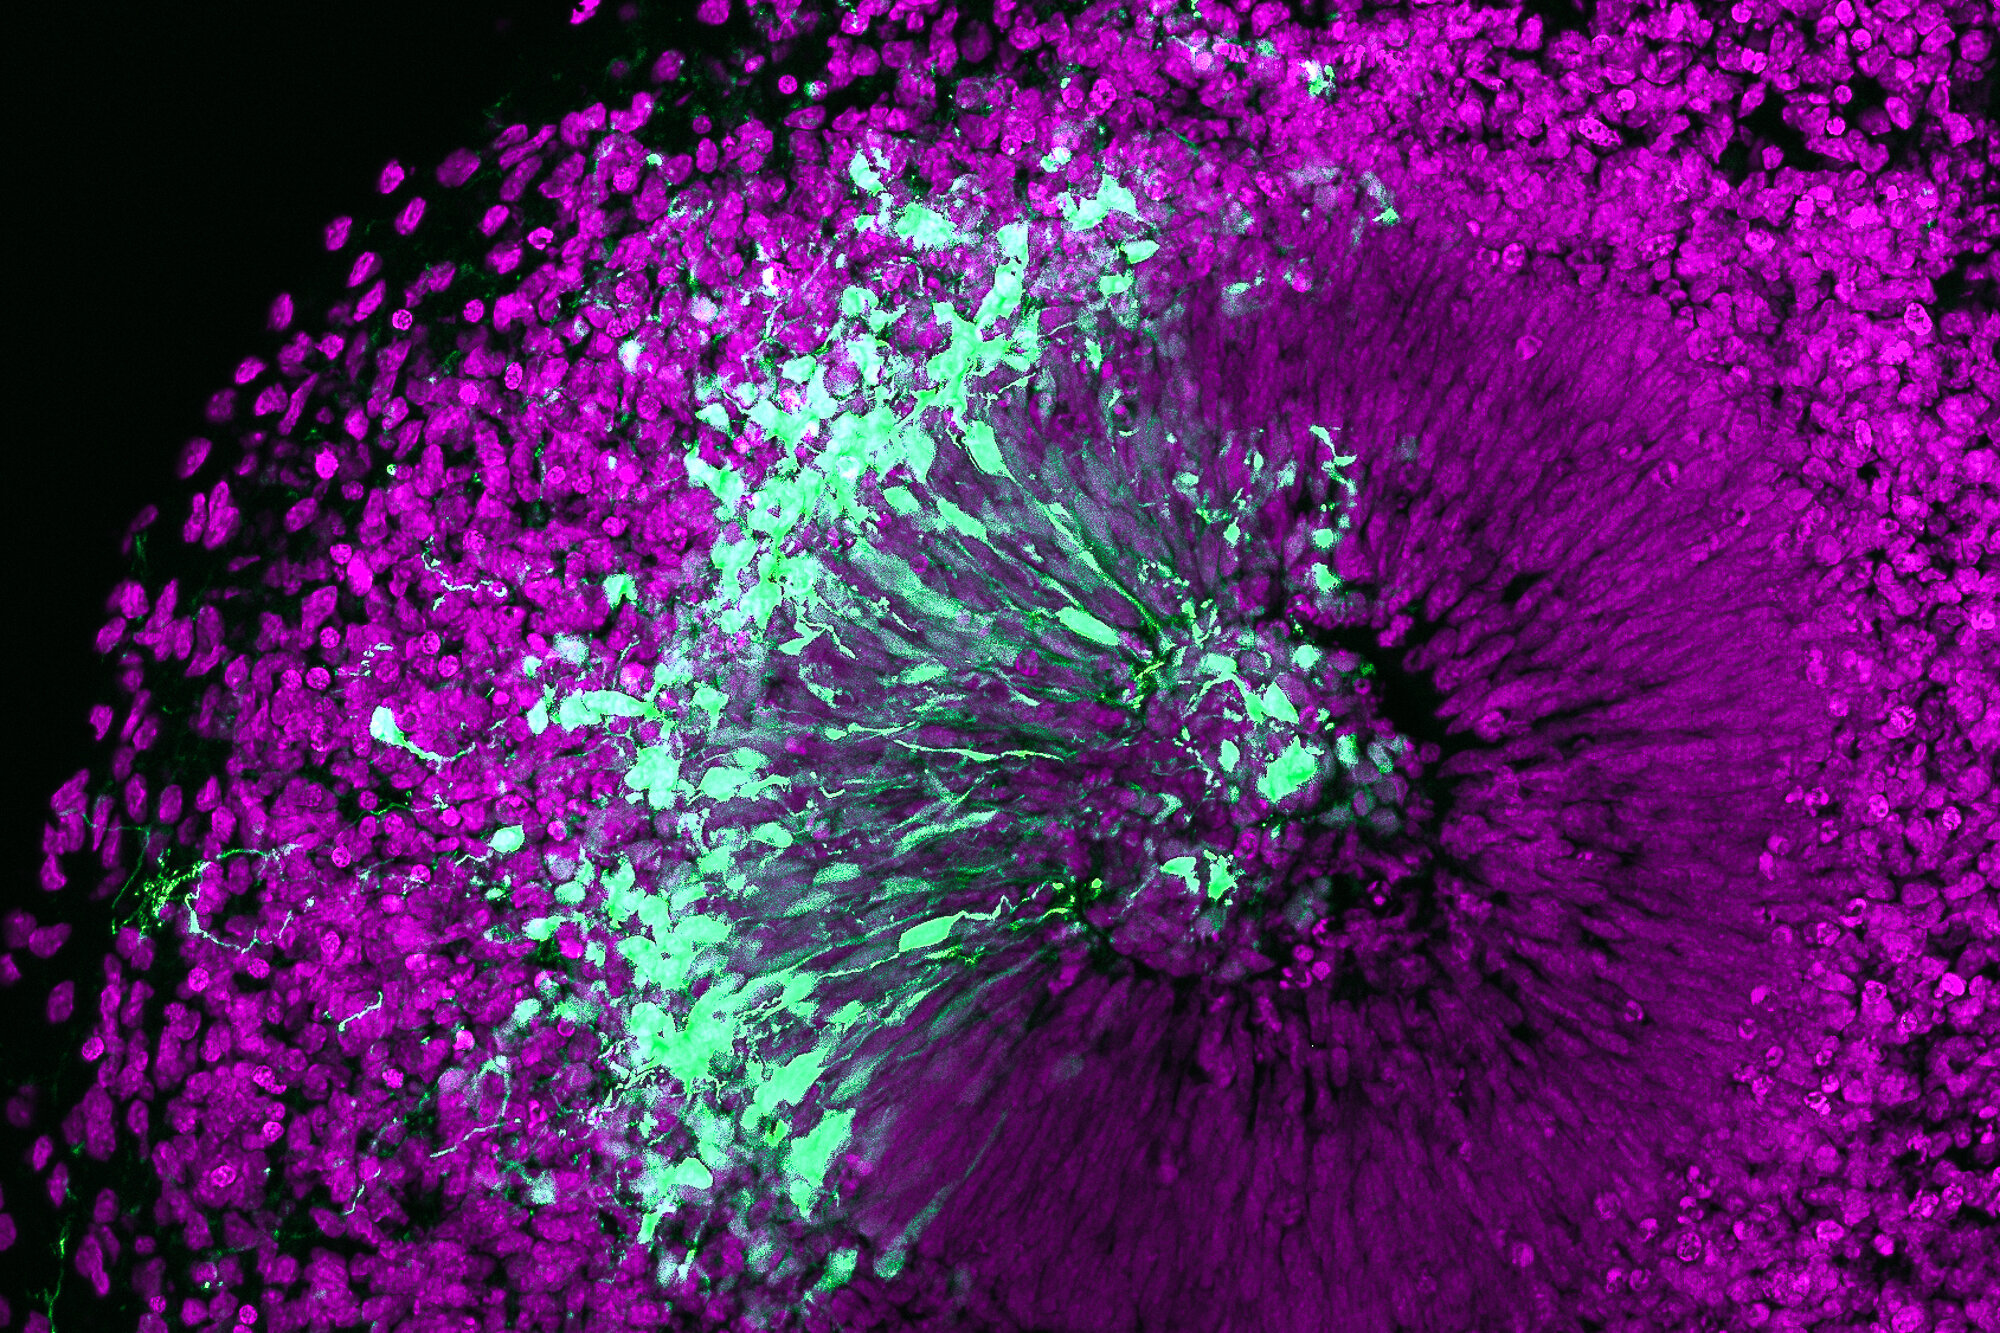 Organoids research identifies factor involved in brain expansion in humans